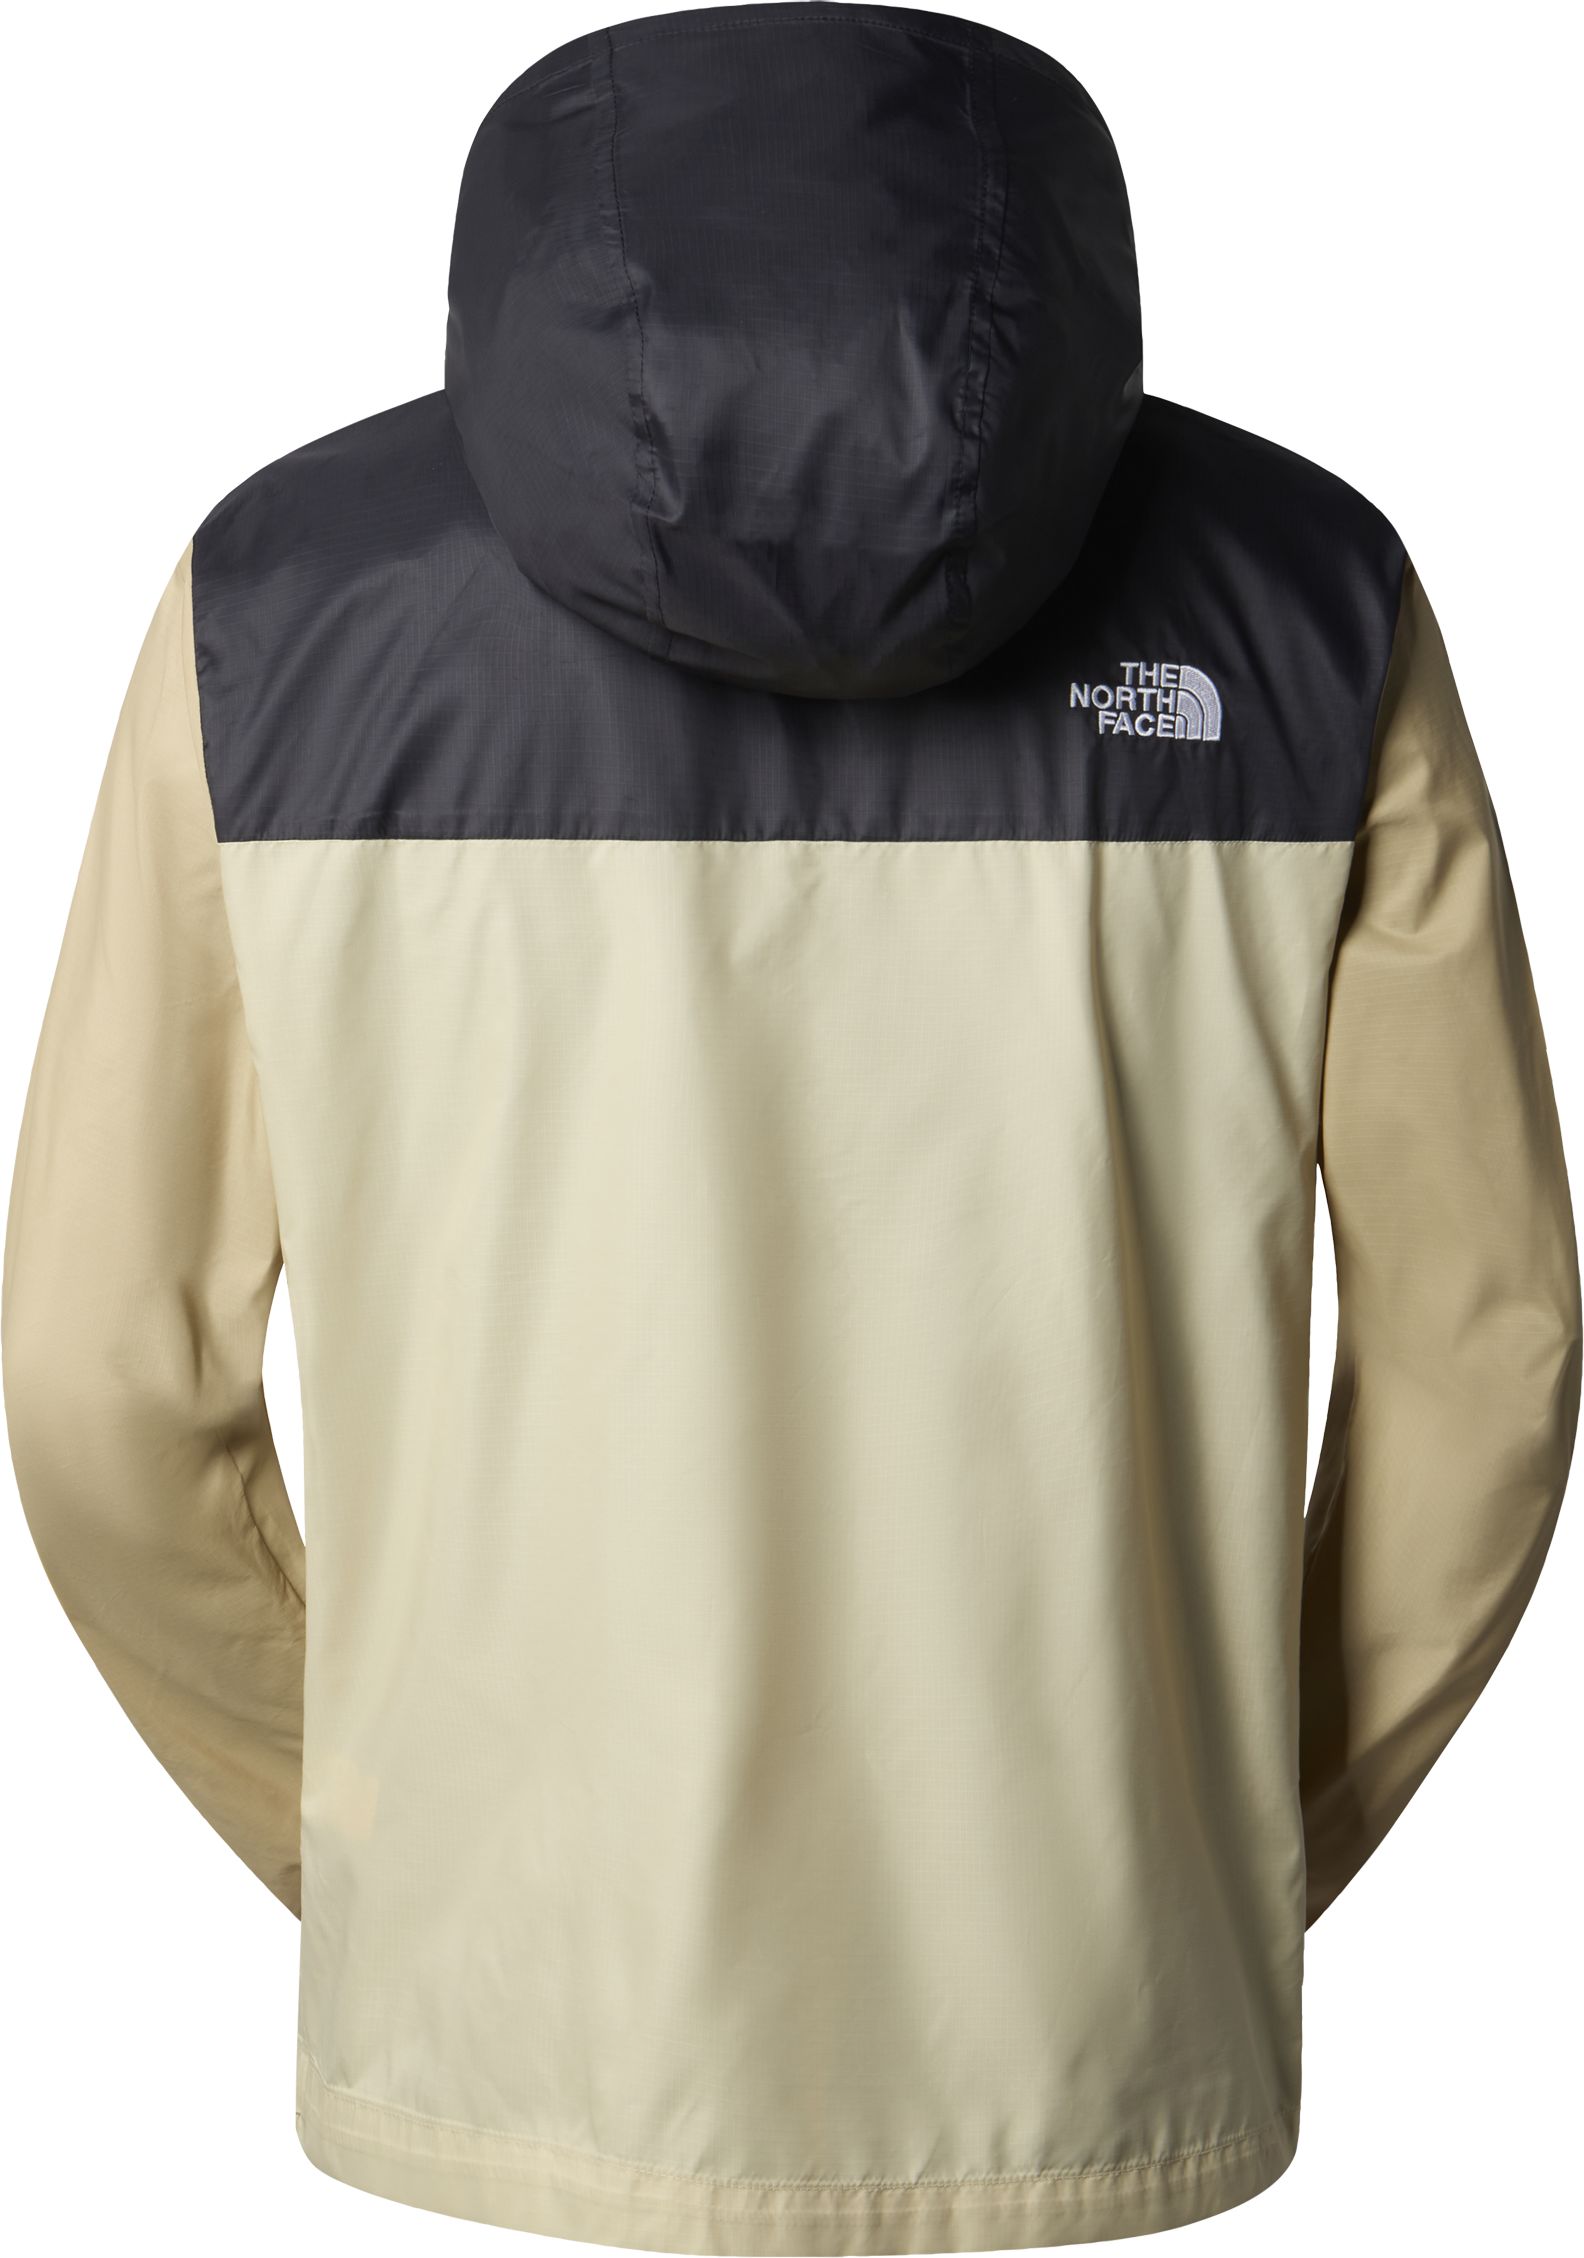 THE NORTH FACE, M CYCLONE JACKET 3